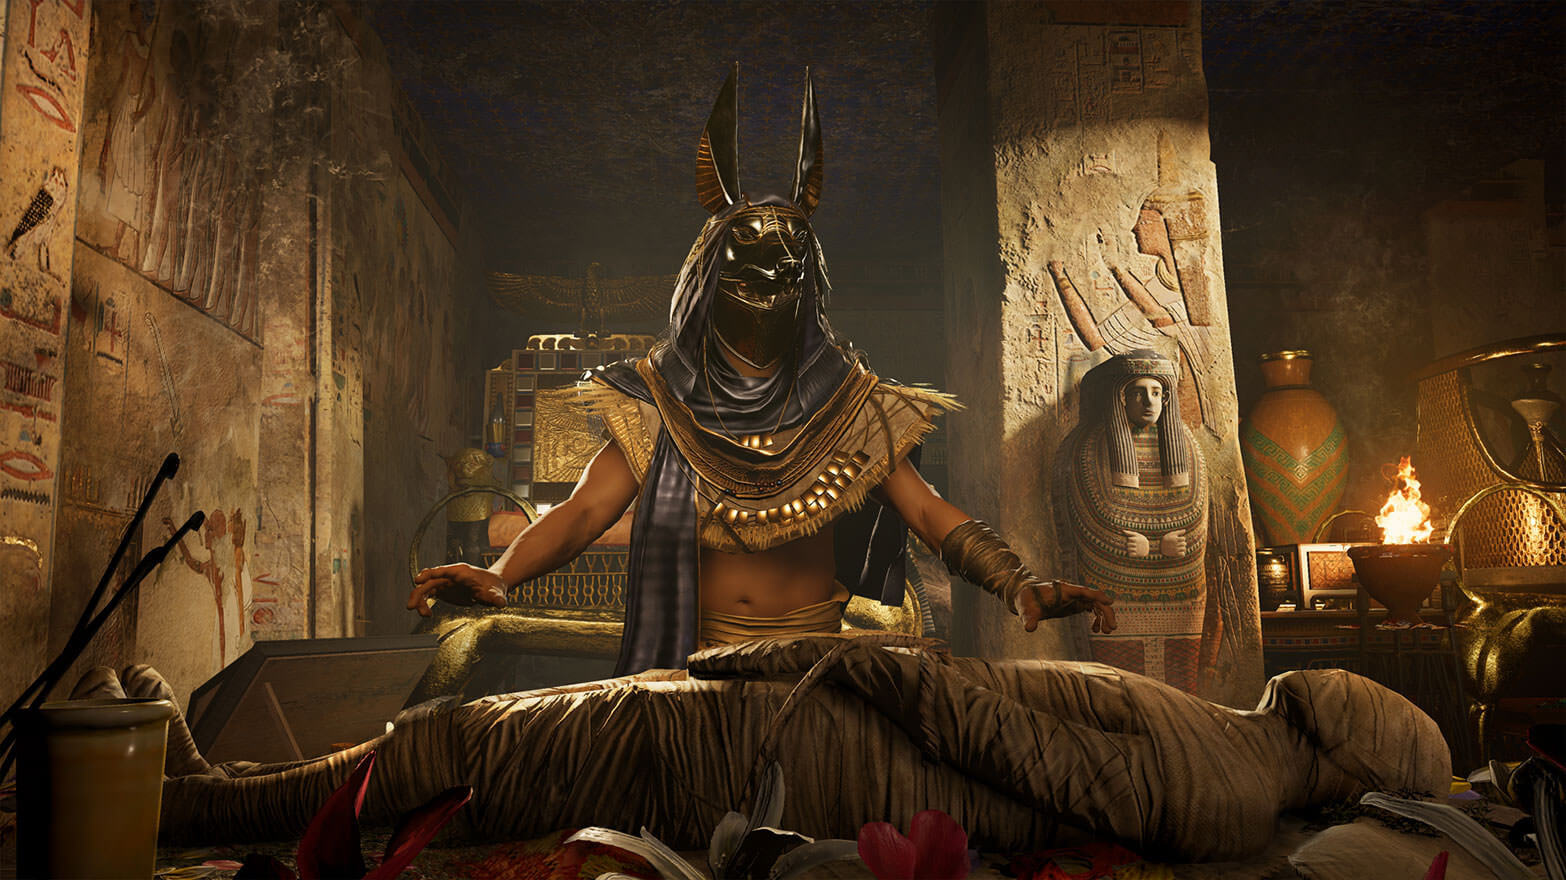 Second Assassin's Creed: Origins DLC "Curse of the Pharaohs" launched | TechSpot